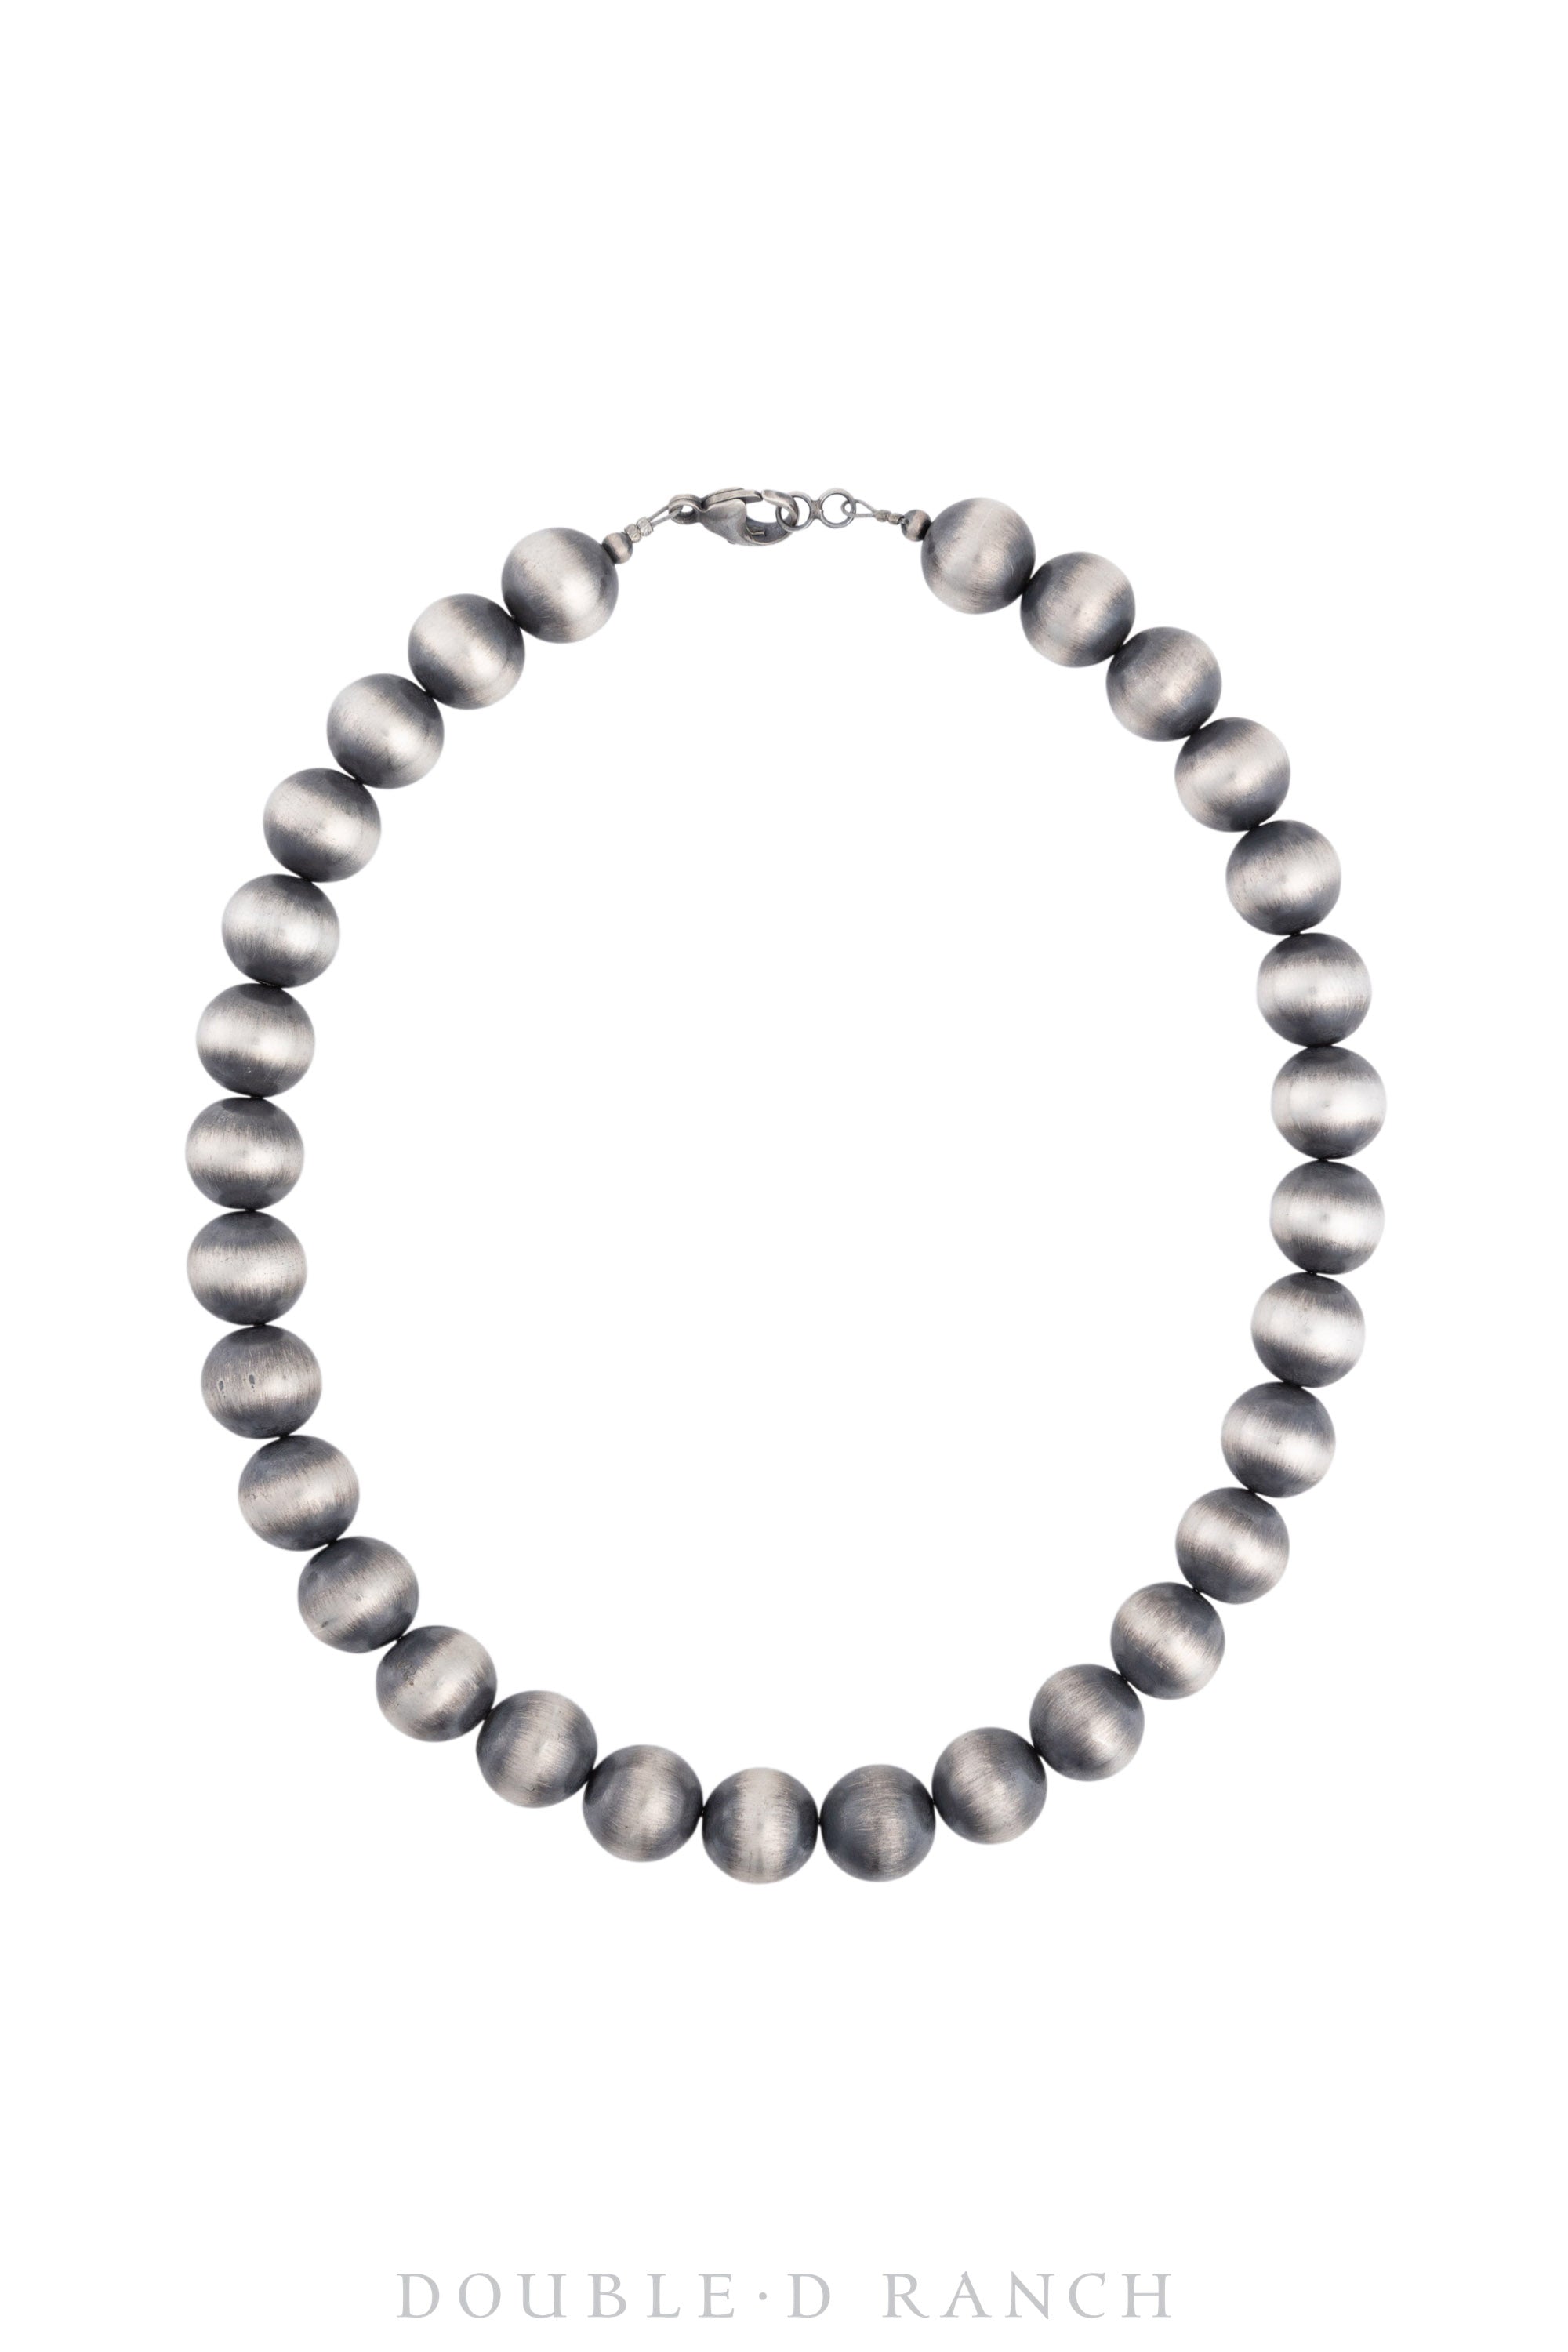 Necklace, Desert Pearls, Sterling Silver, 15", Contemporary, 2006